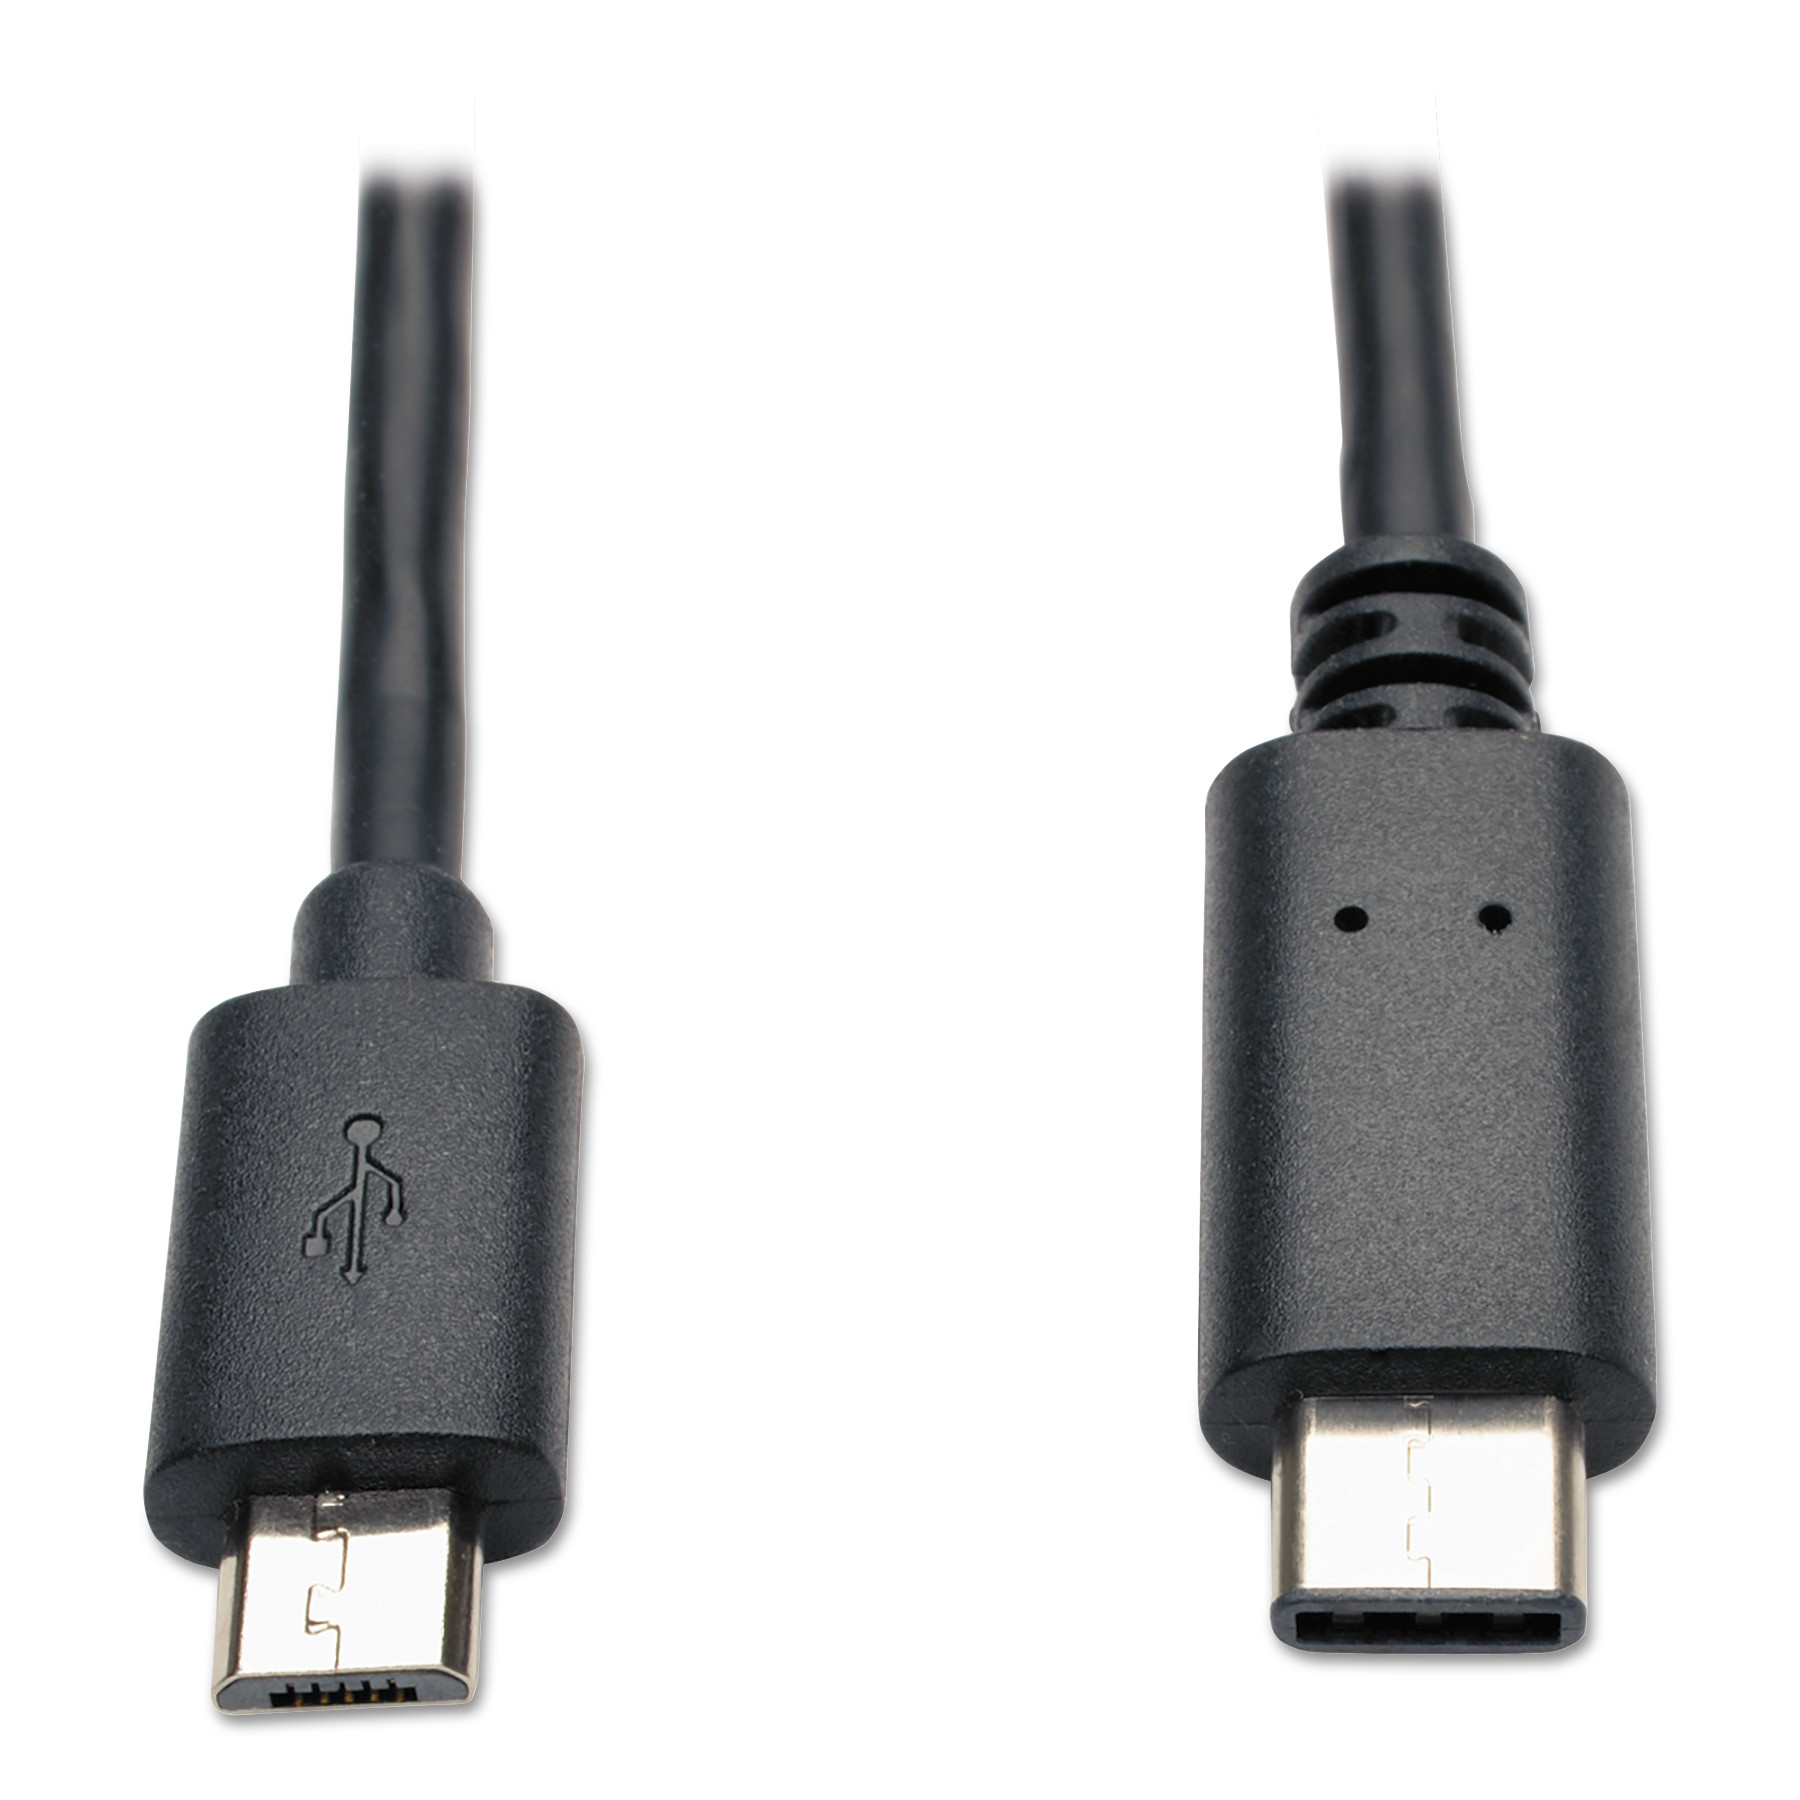 USB 2.0 Gold Cable, USB Micro-B Male, 6 ft, Black